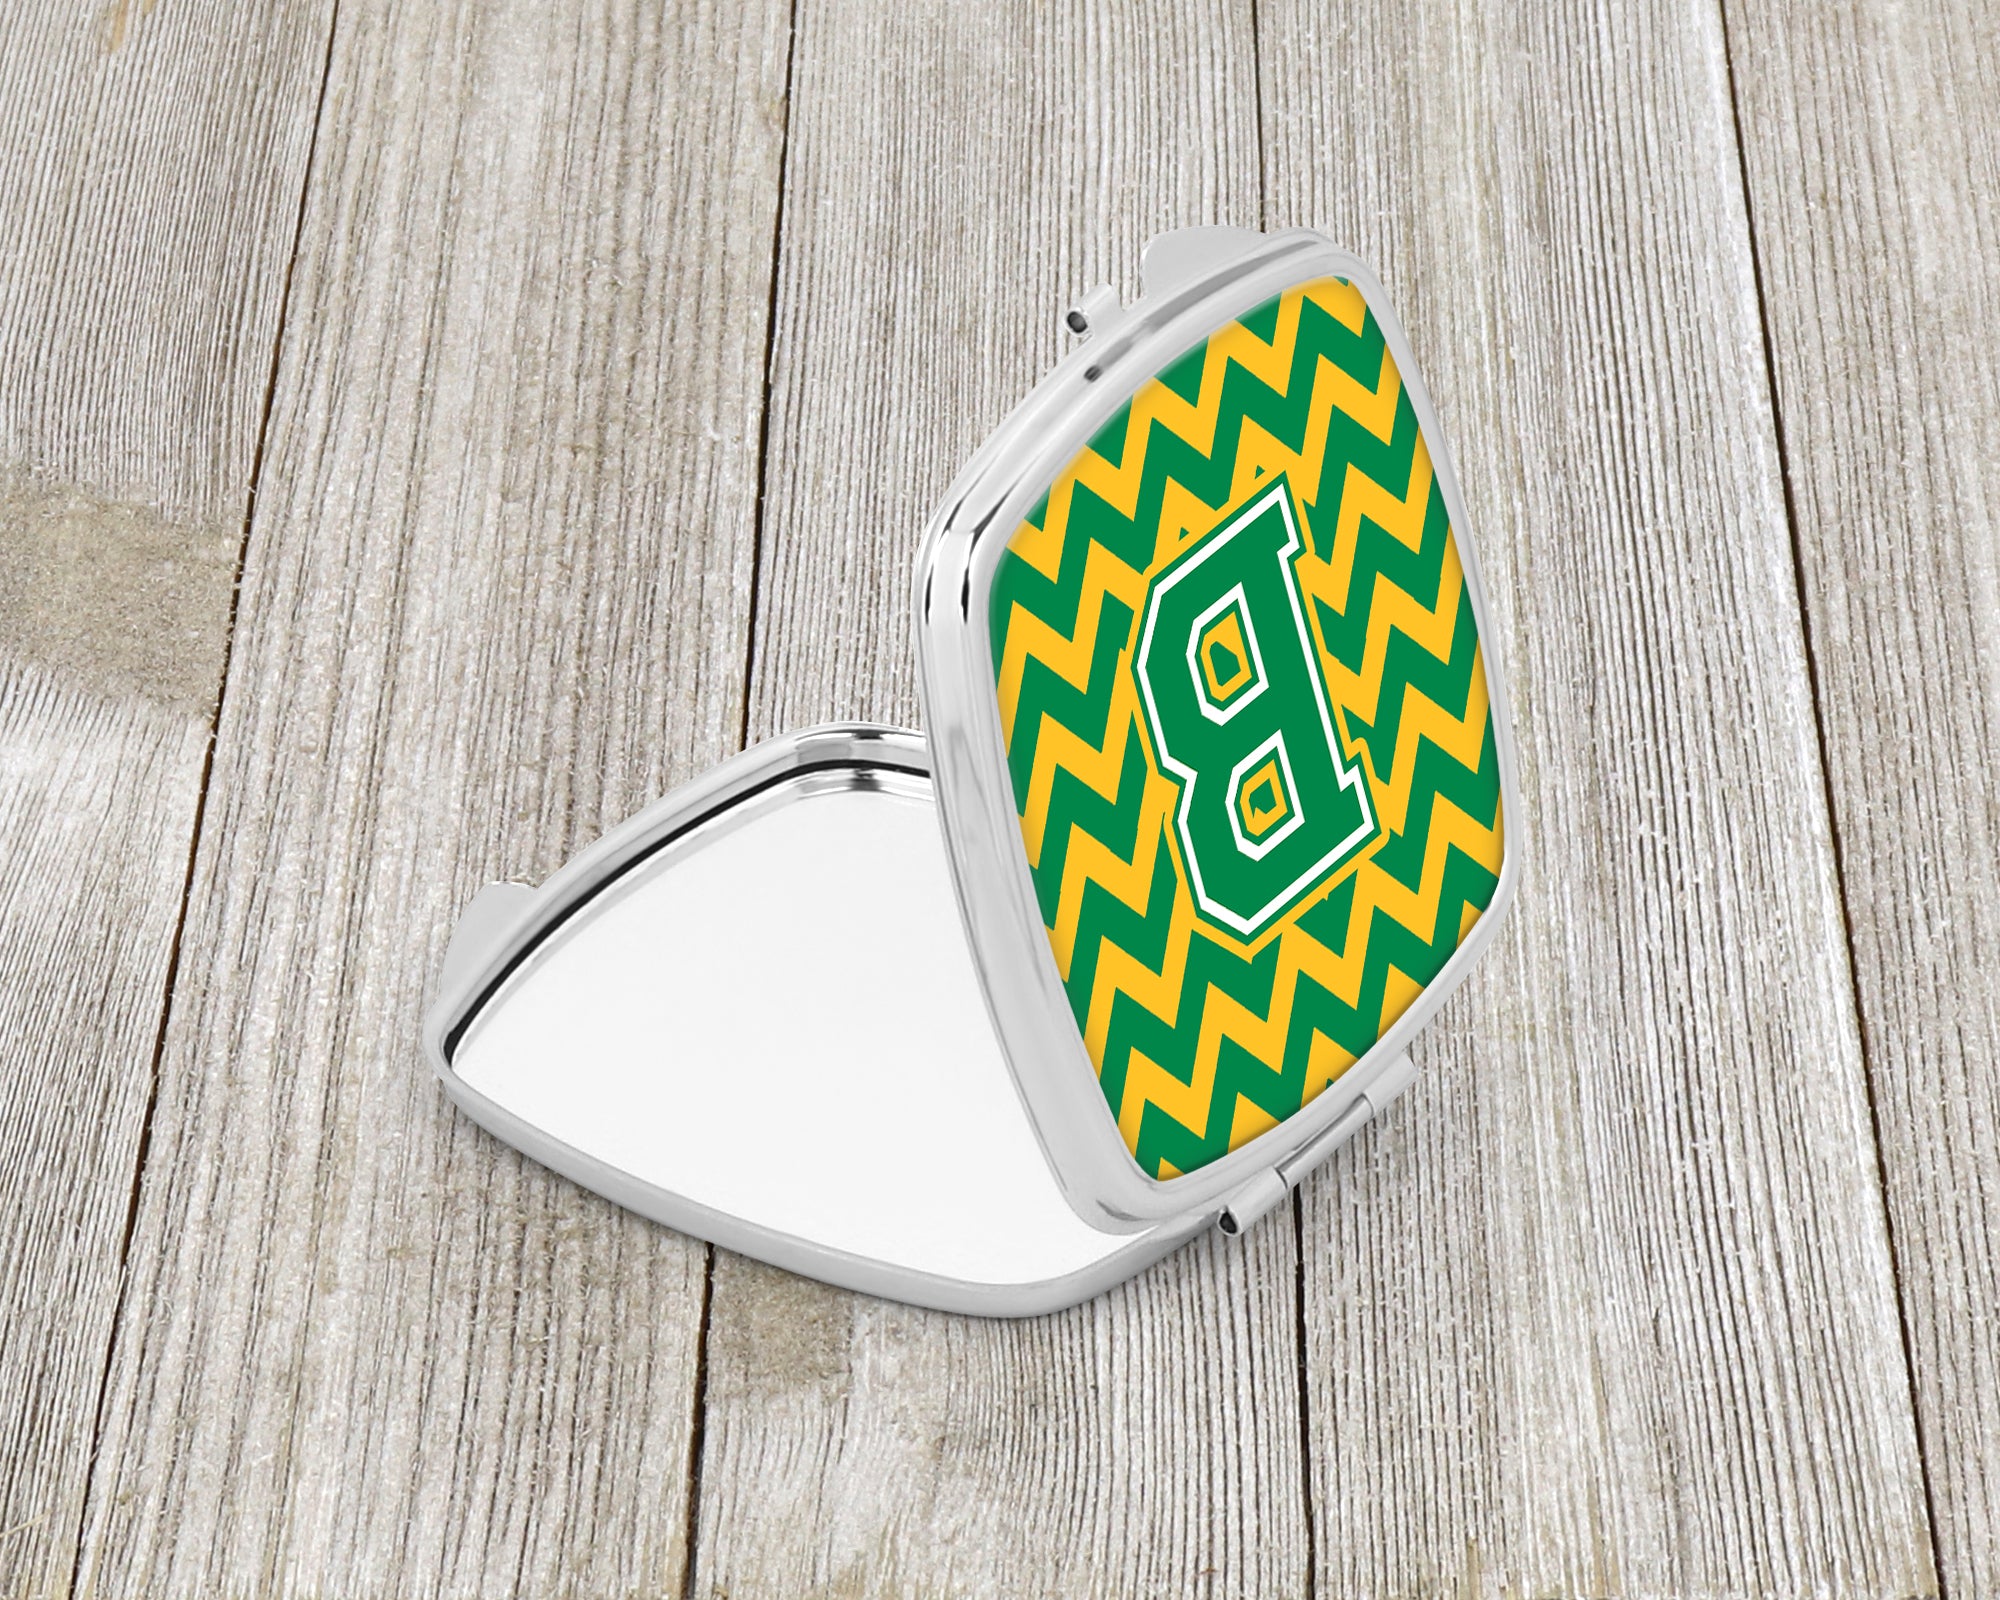 Letter B Chevron Green and Gold Compact Mirror CJ1059-BSCM  the-store.com.